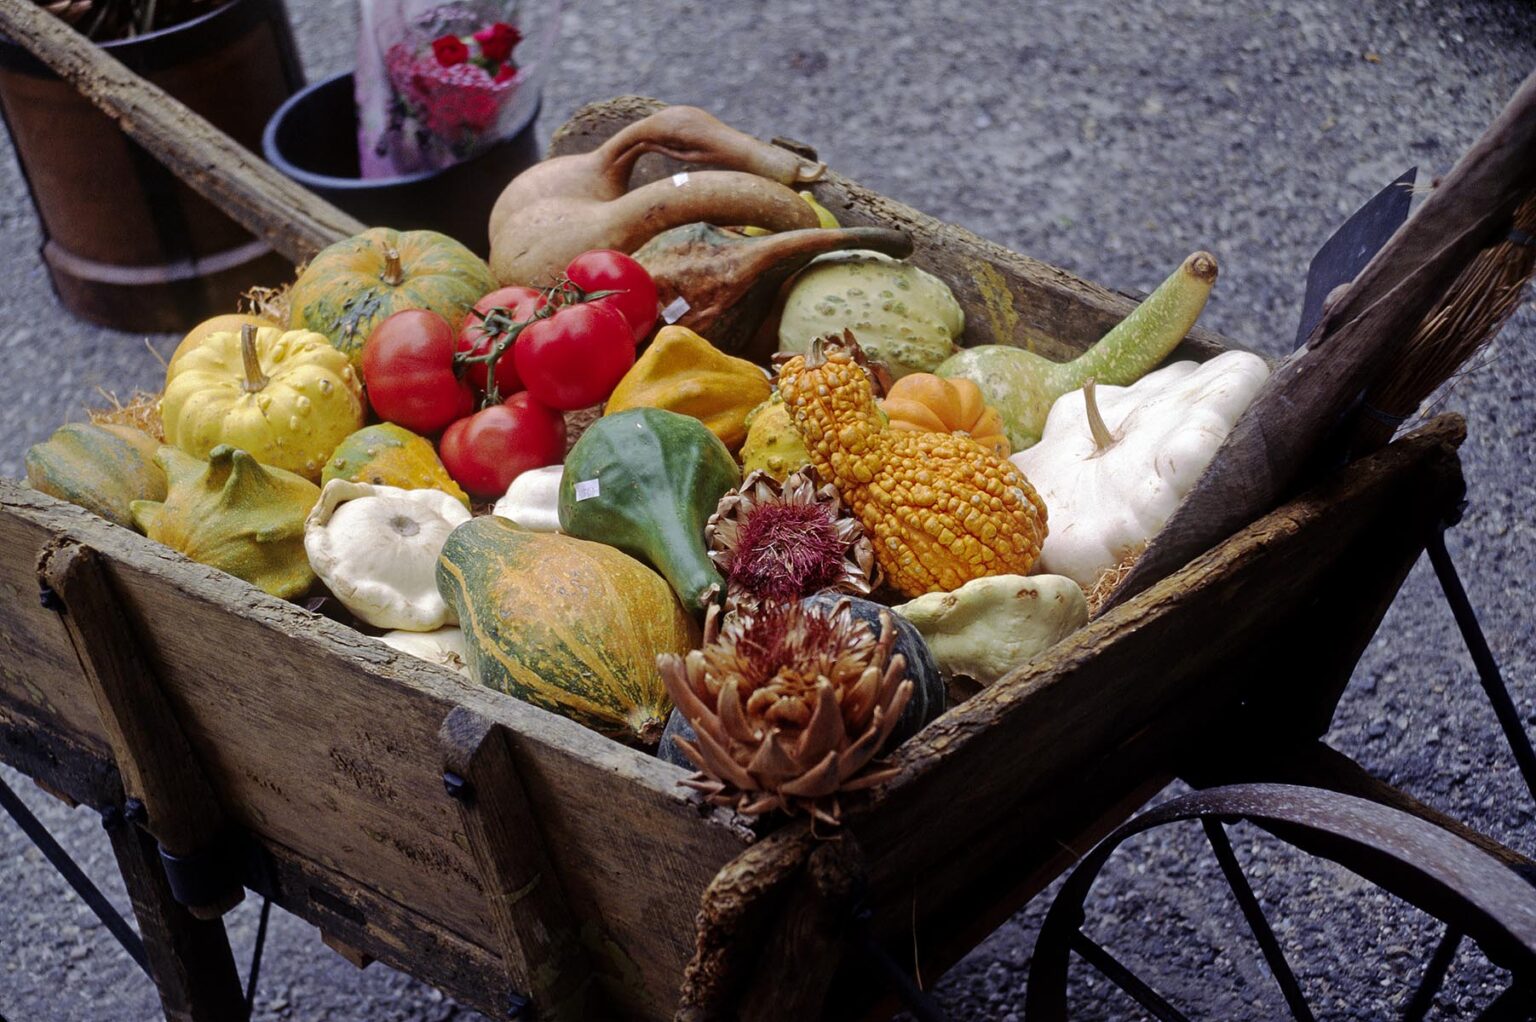 Wheelbarrow of gourds & vegetables on display in the golden-stone village of GORDES  - PROVENCE, FRANCE